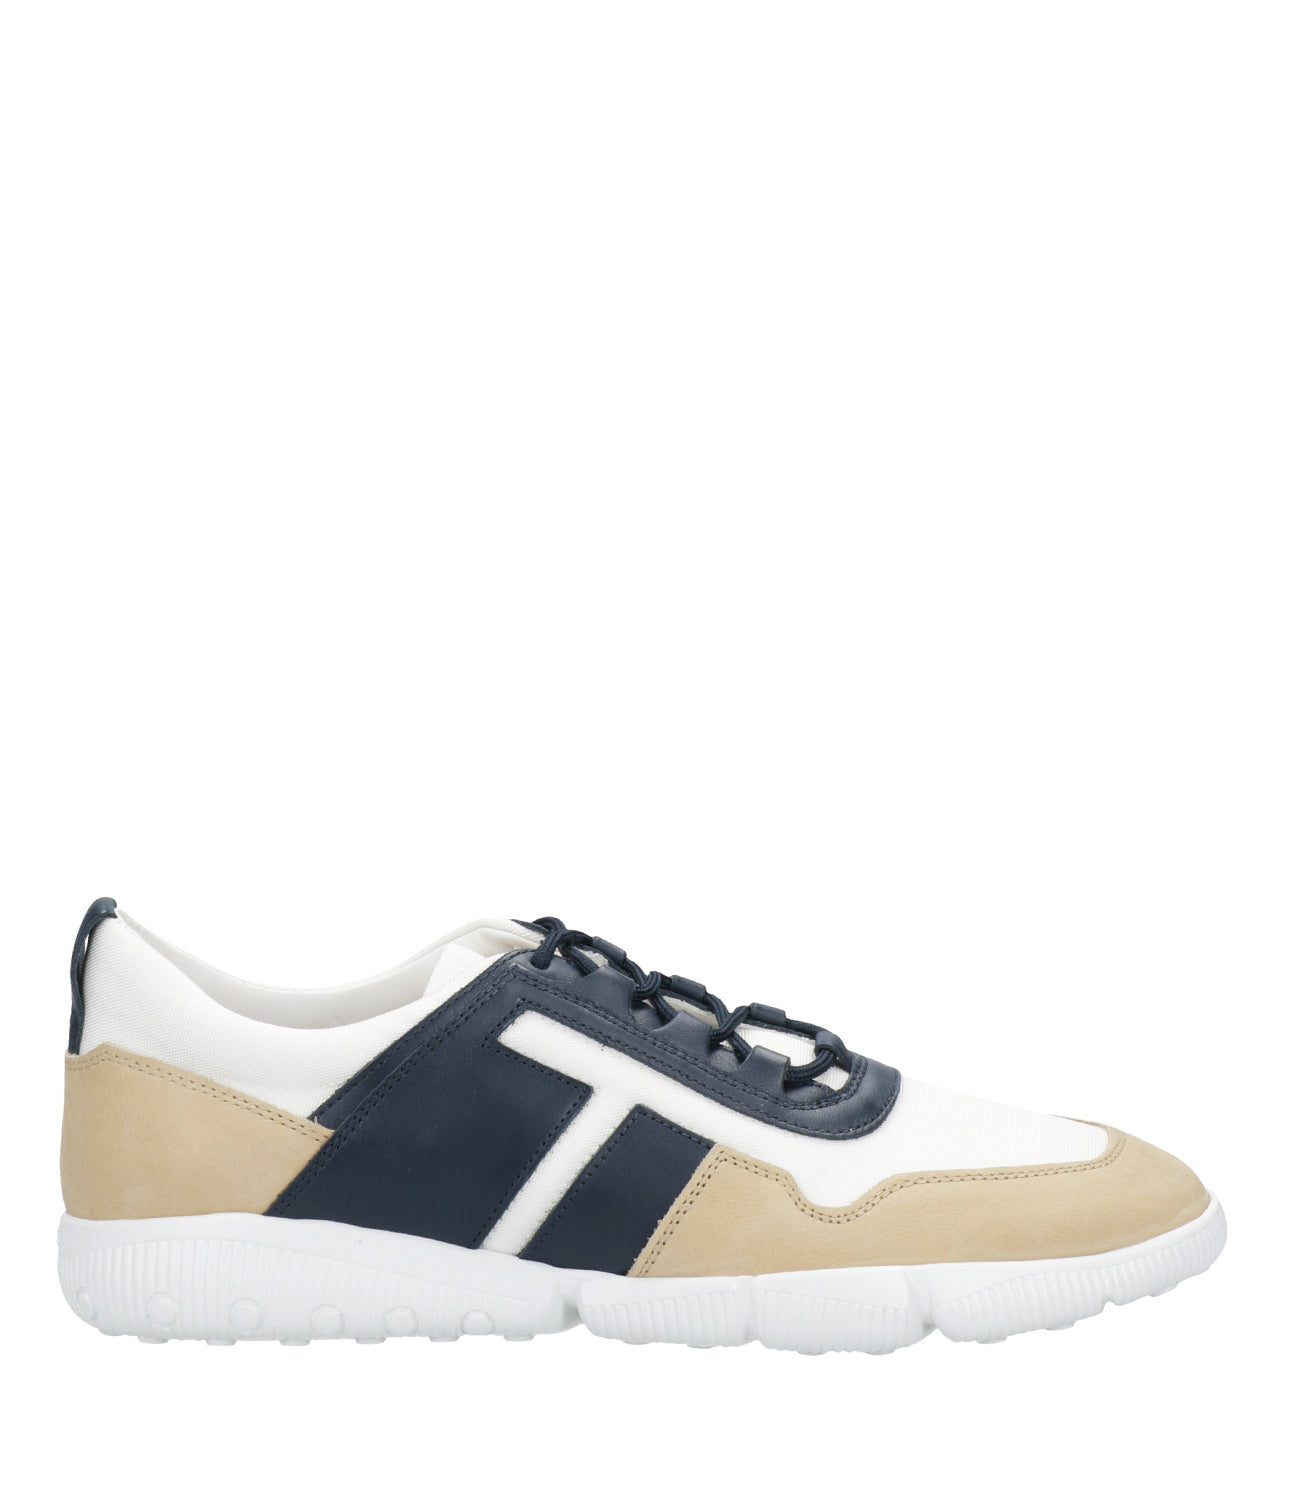 Sneakers in nubuck and technical fabric